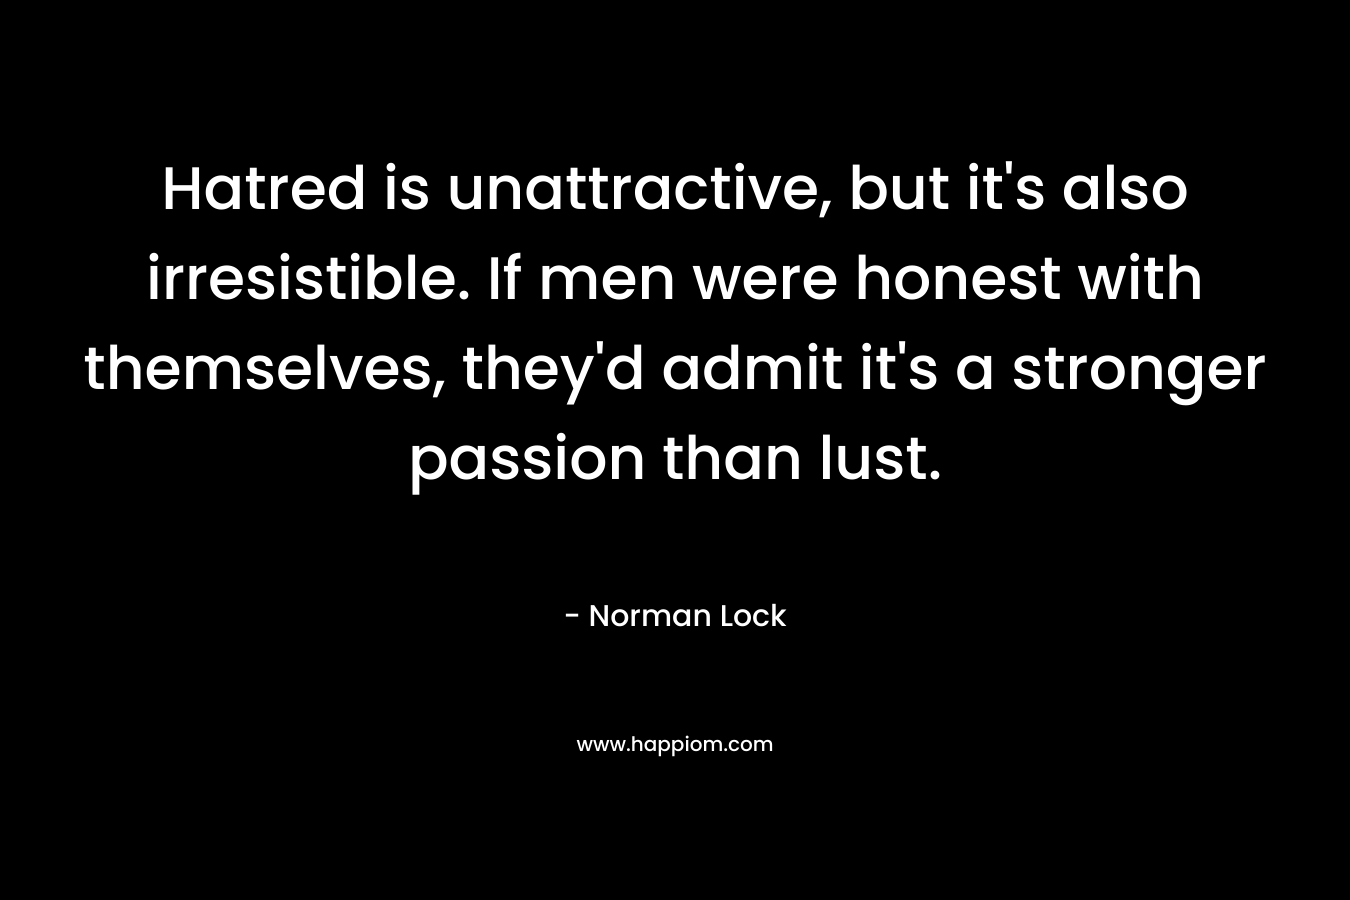 Hatred is unattractive, but it's also irresistible. If men were honest with themselves, they'd admit it's a stronger passion than lust.